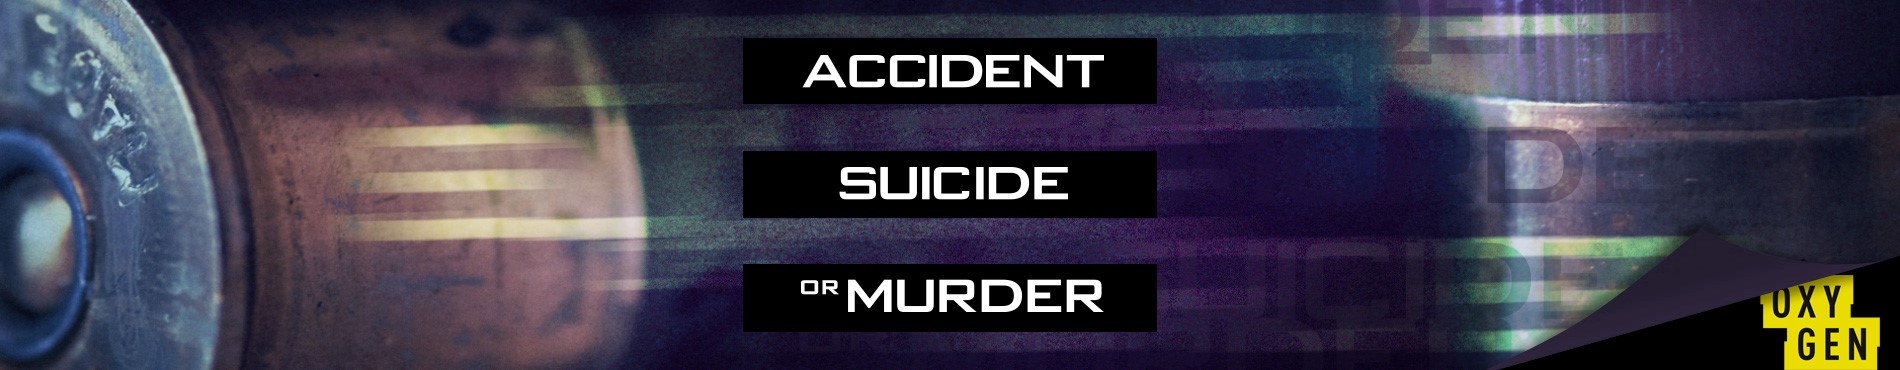 ACCIDENT, SUICIDE or MURDER